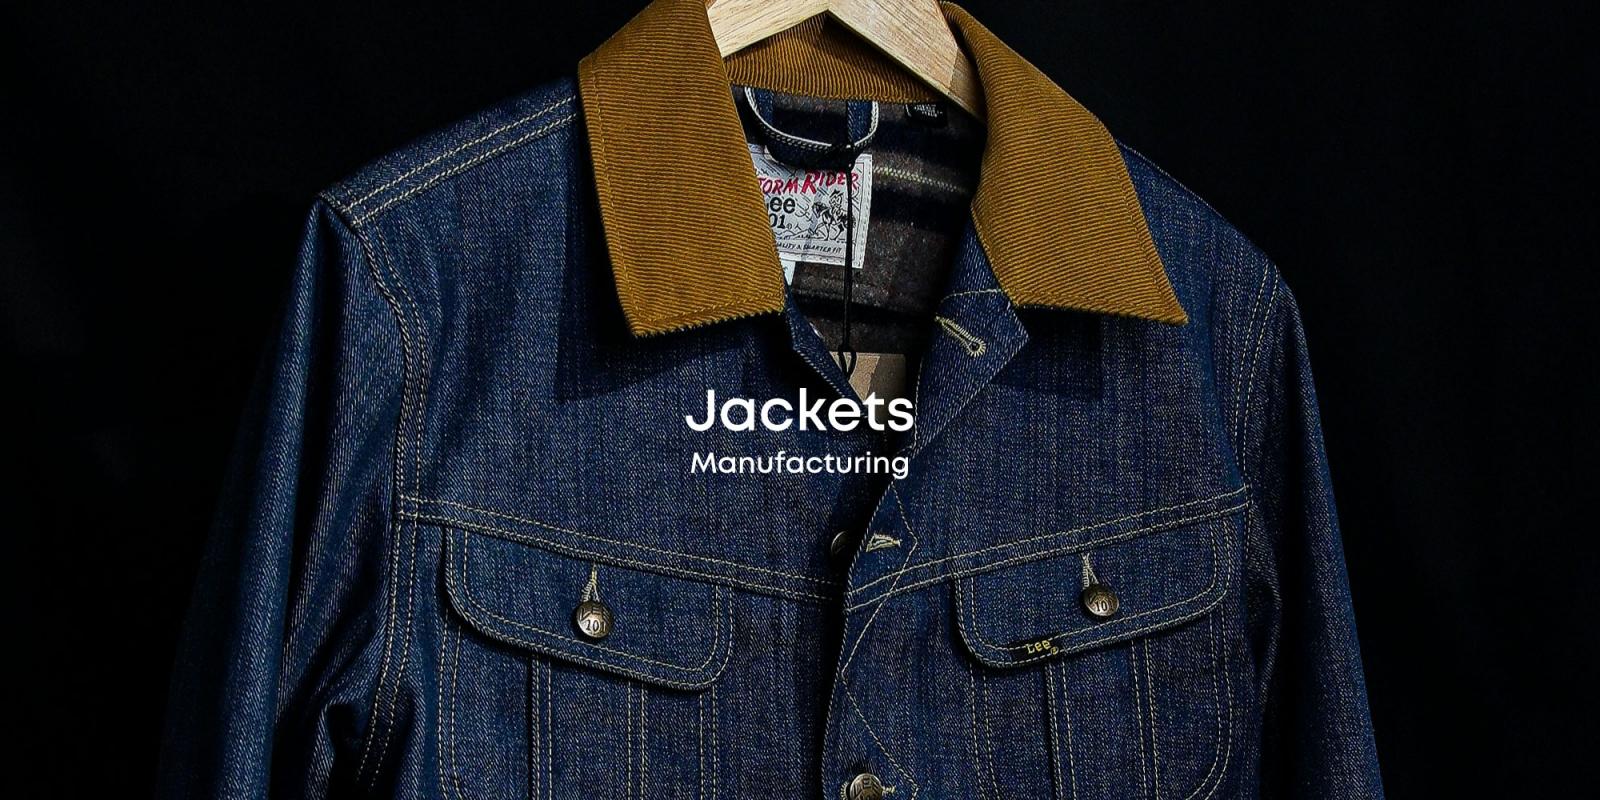 Jackets Manufacturing